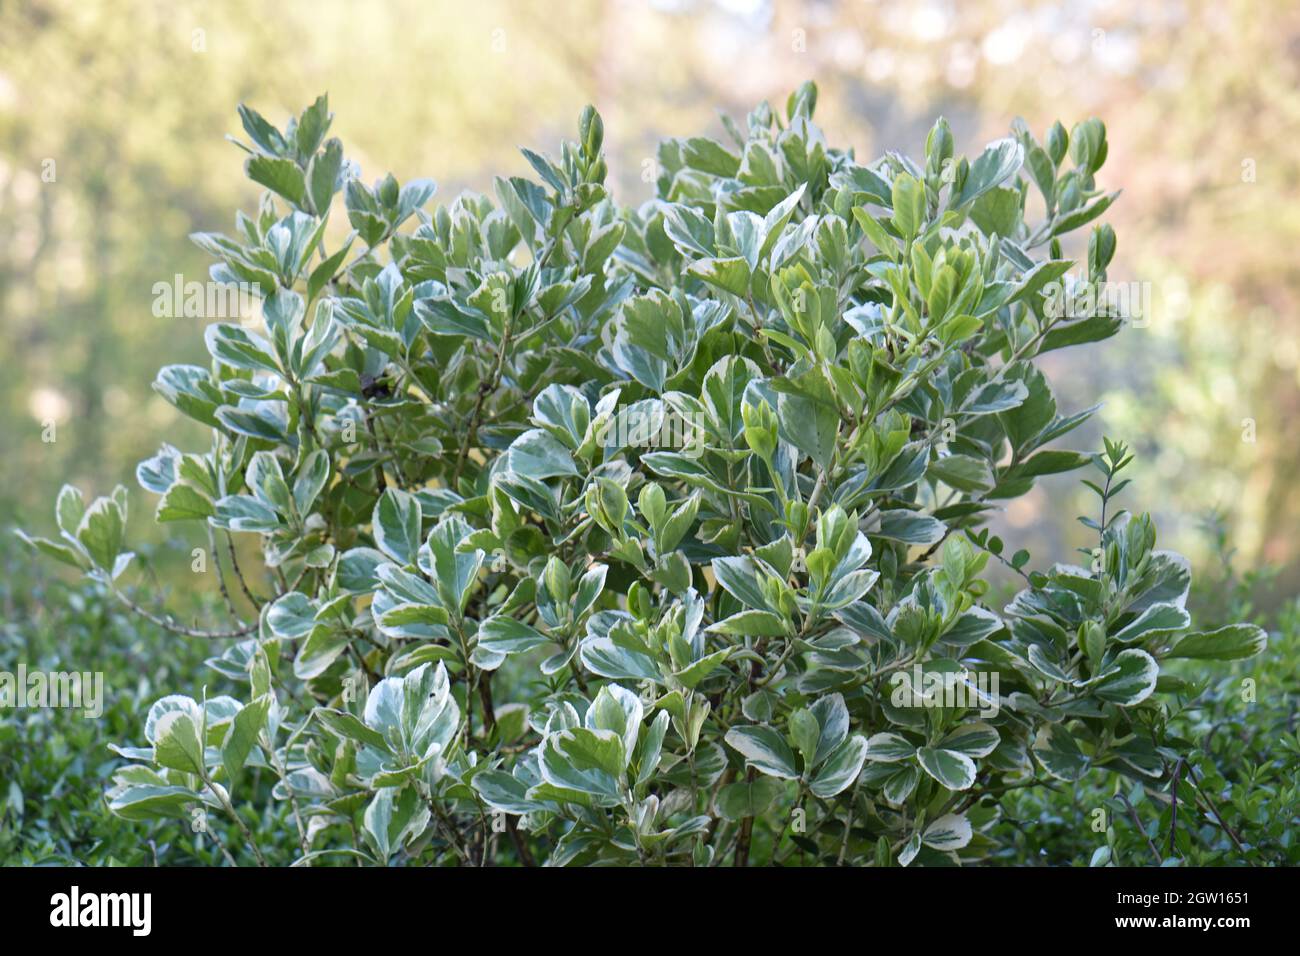 Close-up Of Plants Growing On Field Stock Photo